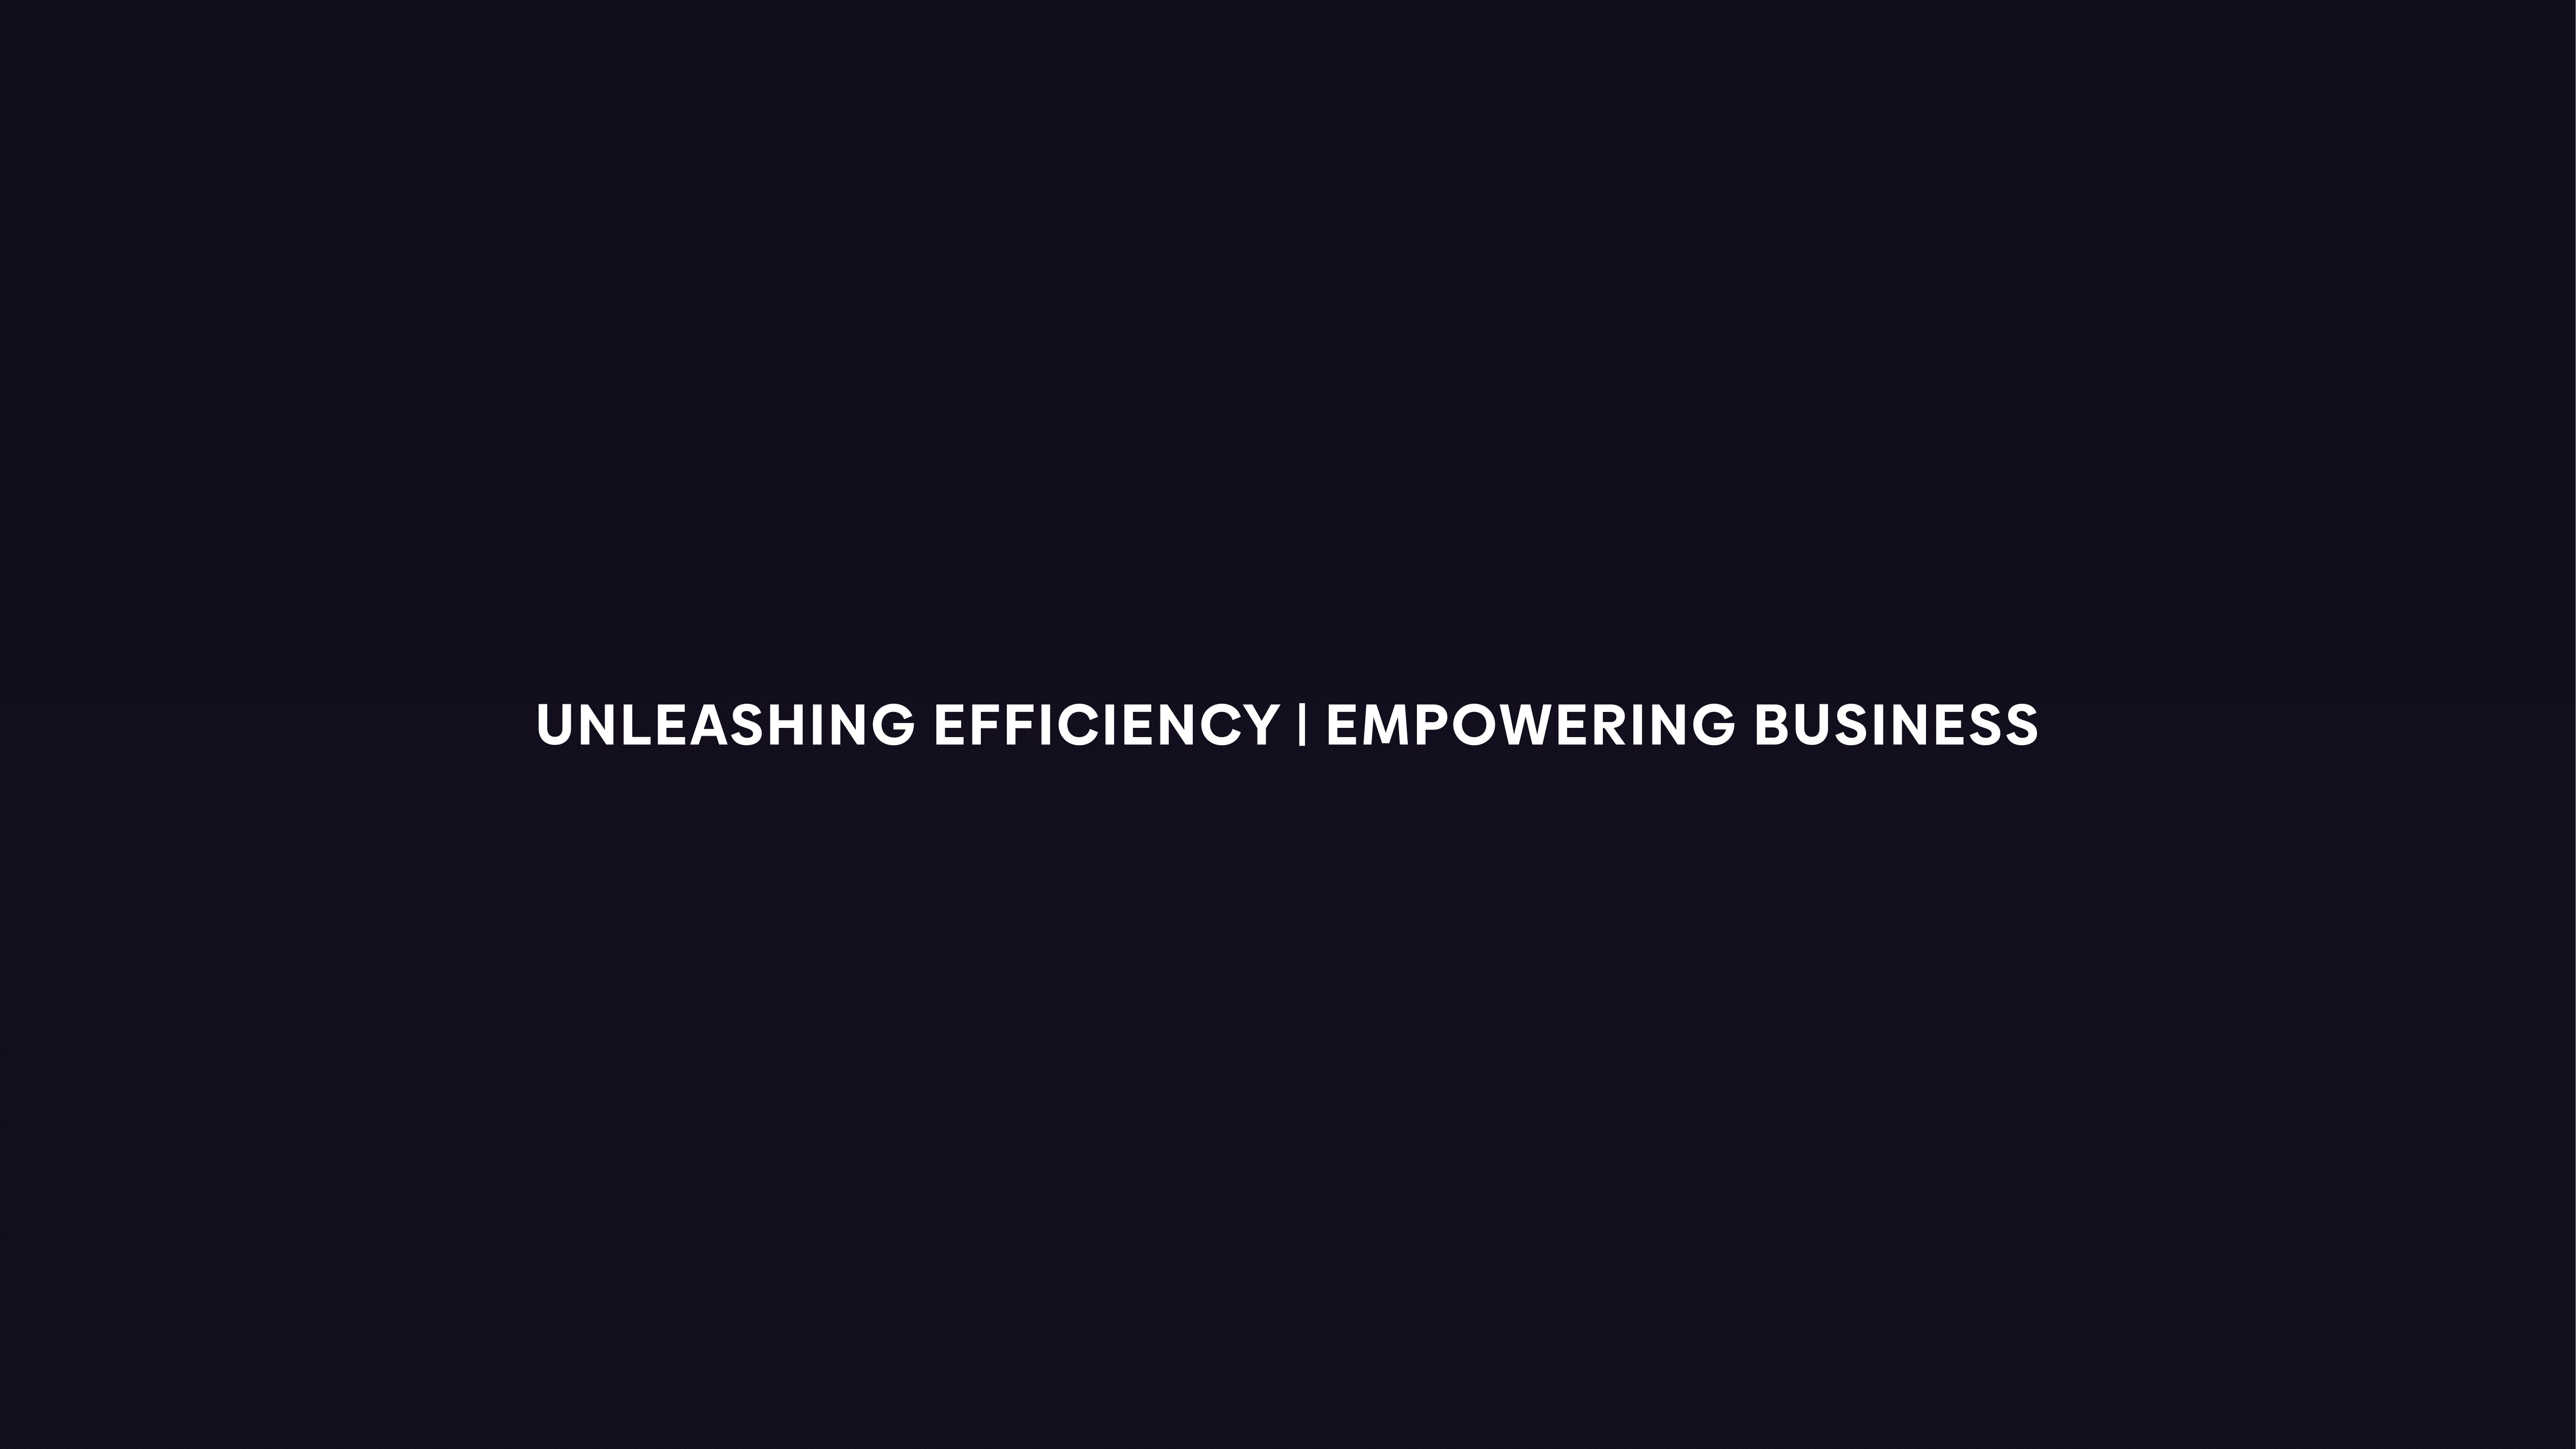 Unleashing Efficiency, Empowering Business tagline for North TIme & Data in NOrthern Ireland by Rapid agency